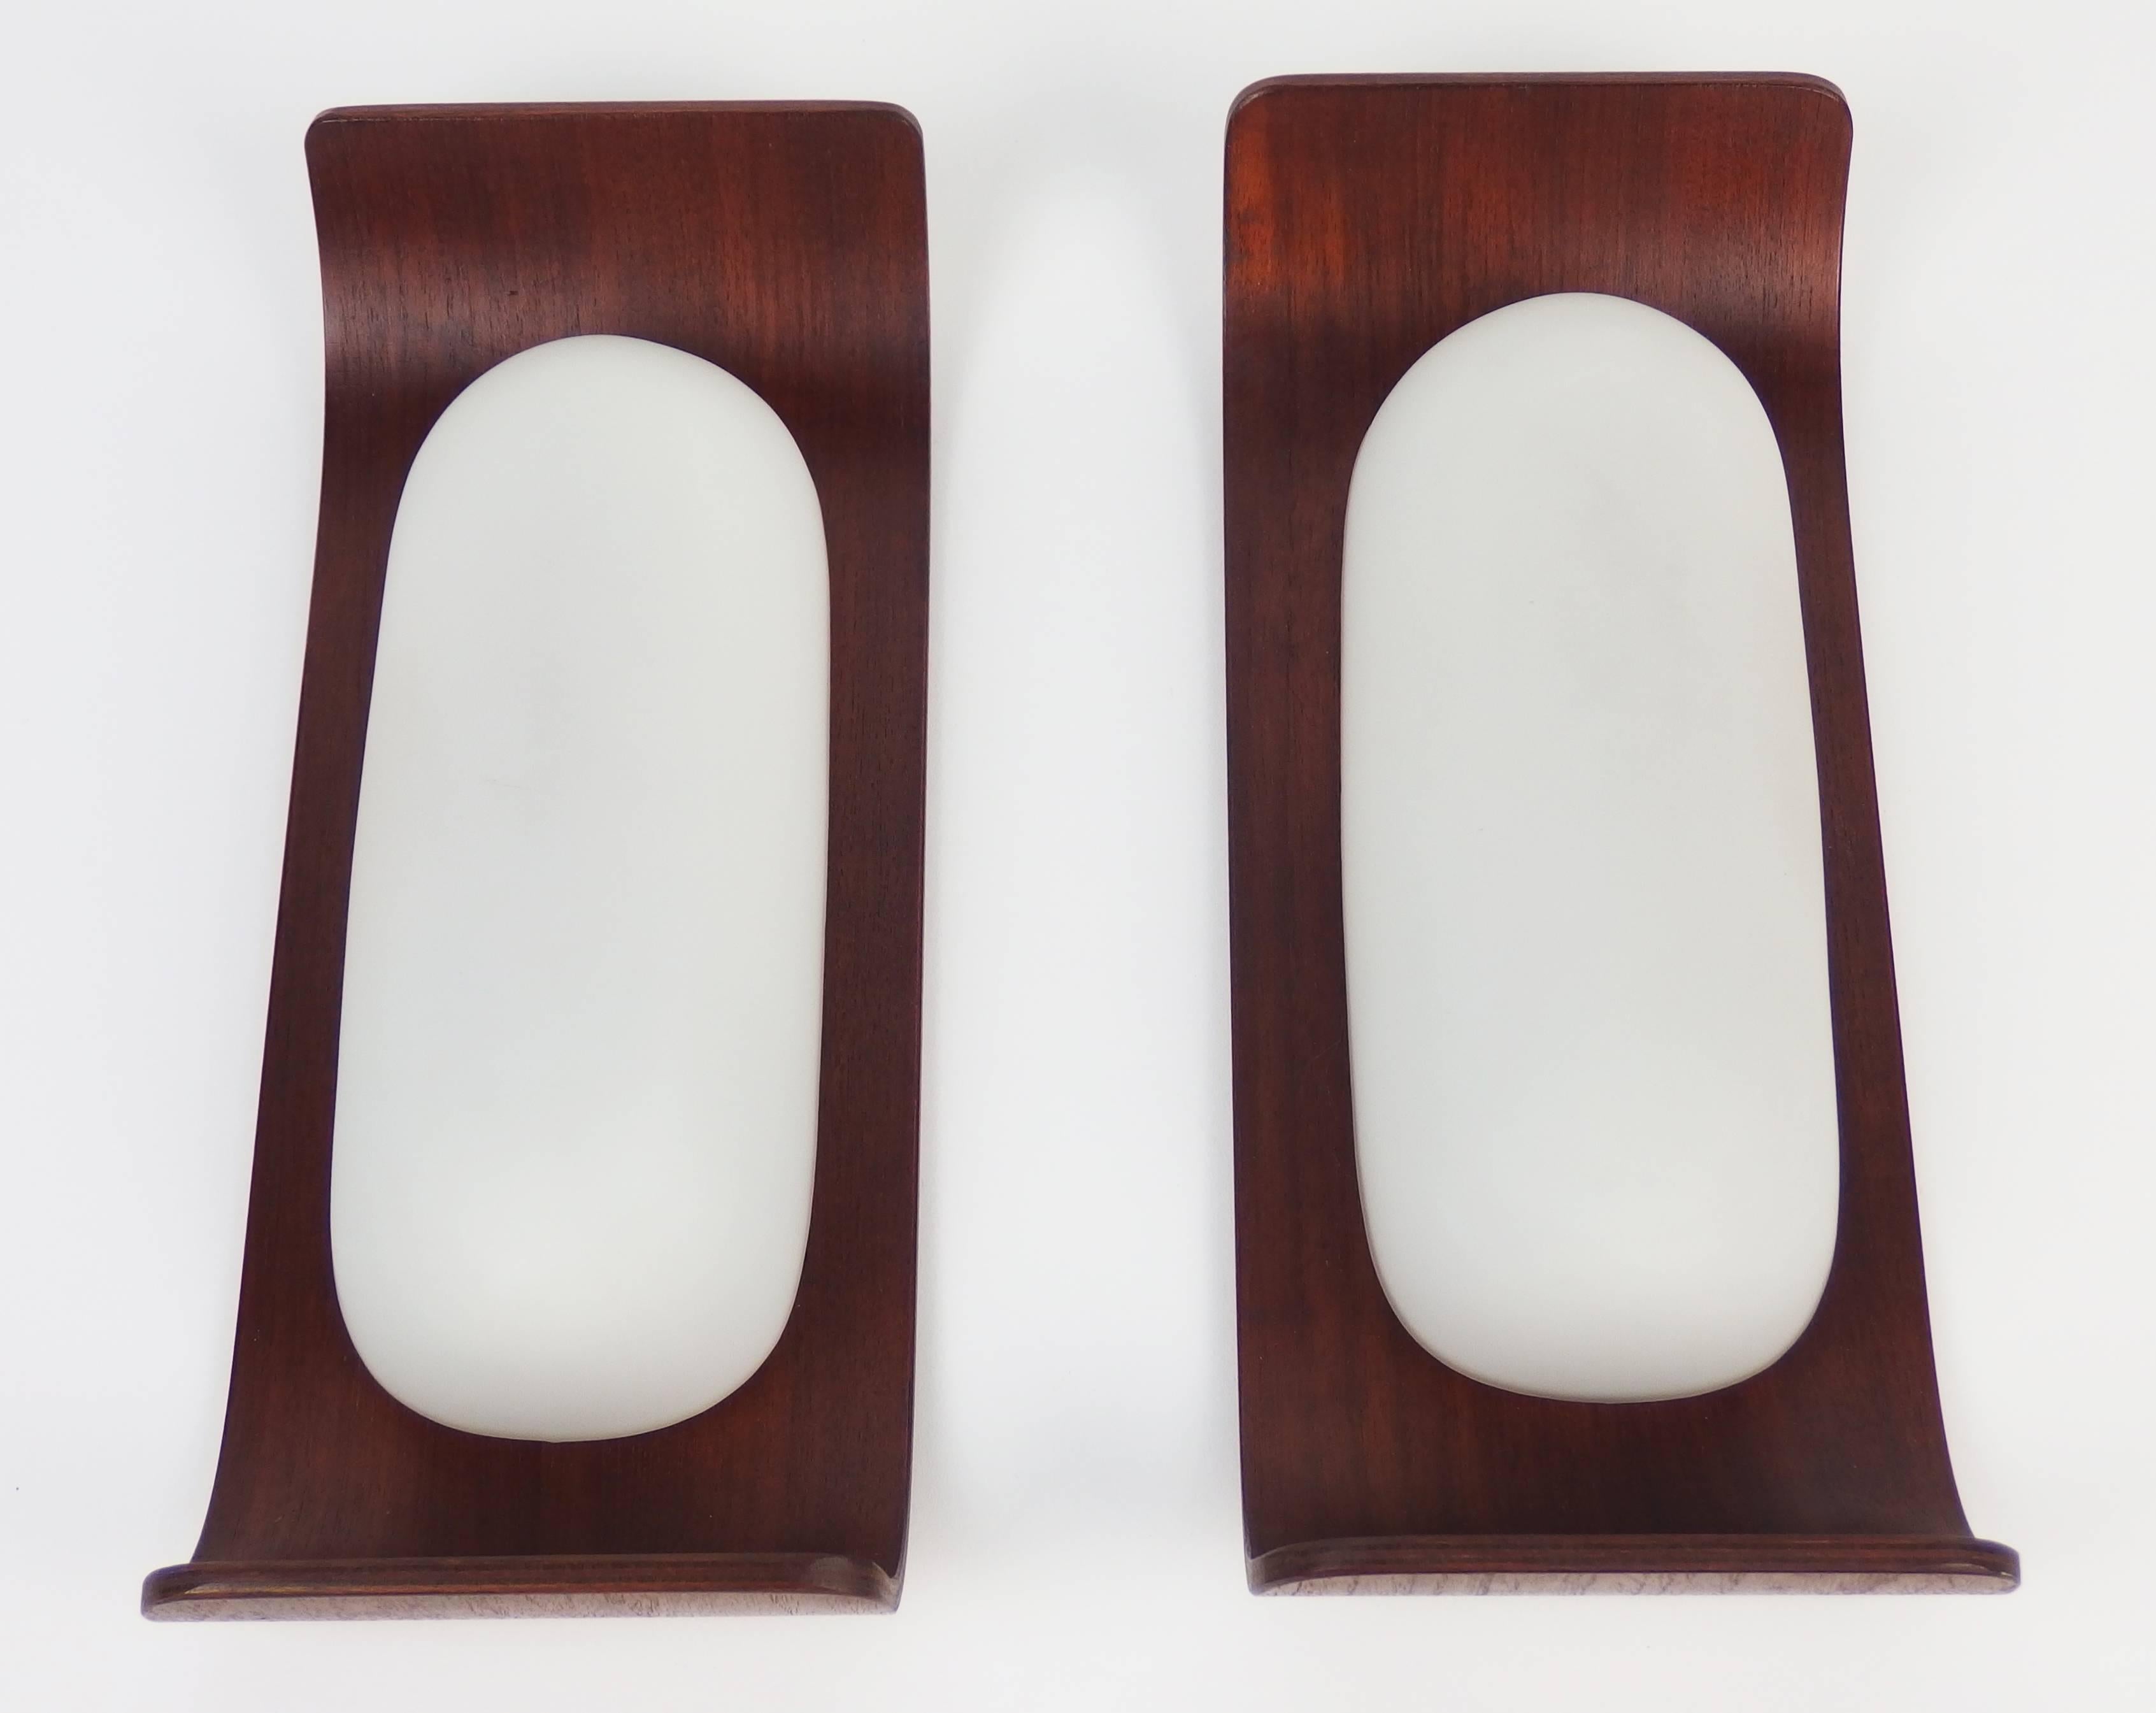 Two sconces with a bent teak wood support and white satin glass shades.